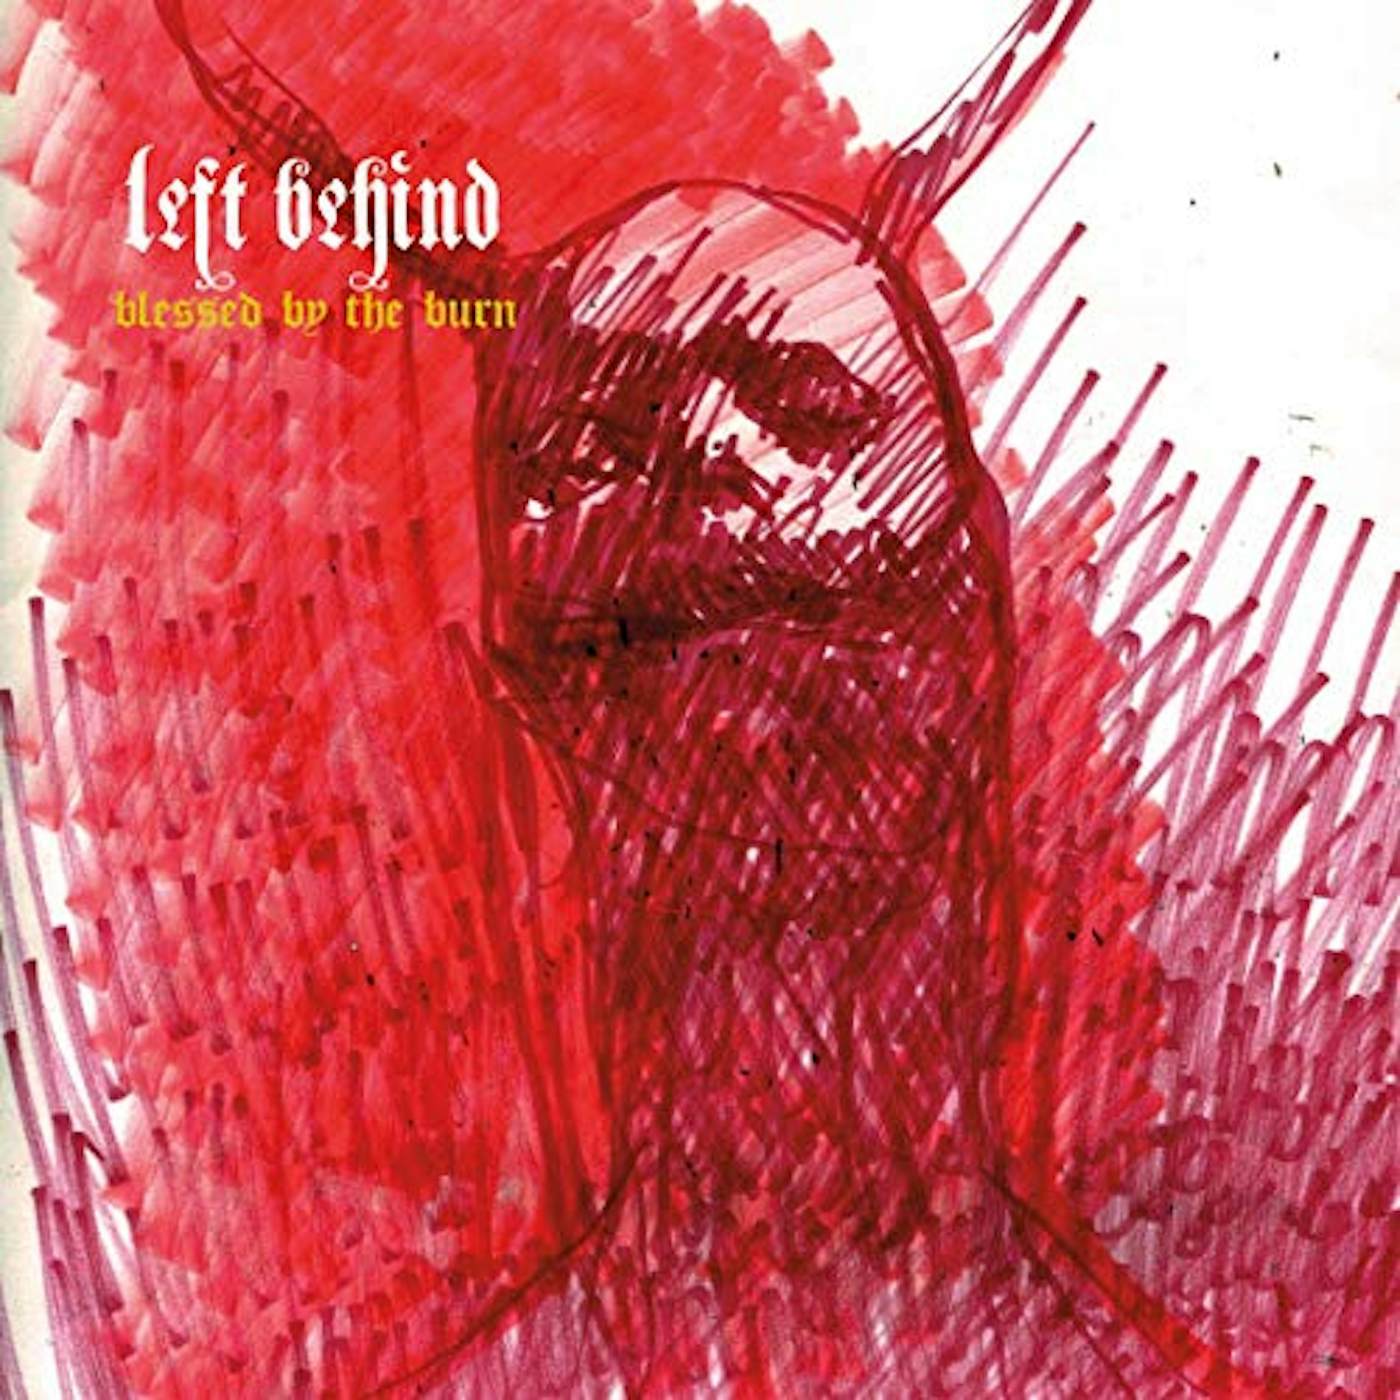 Left Behind BLESSED BY THE BURN CD